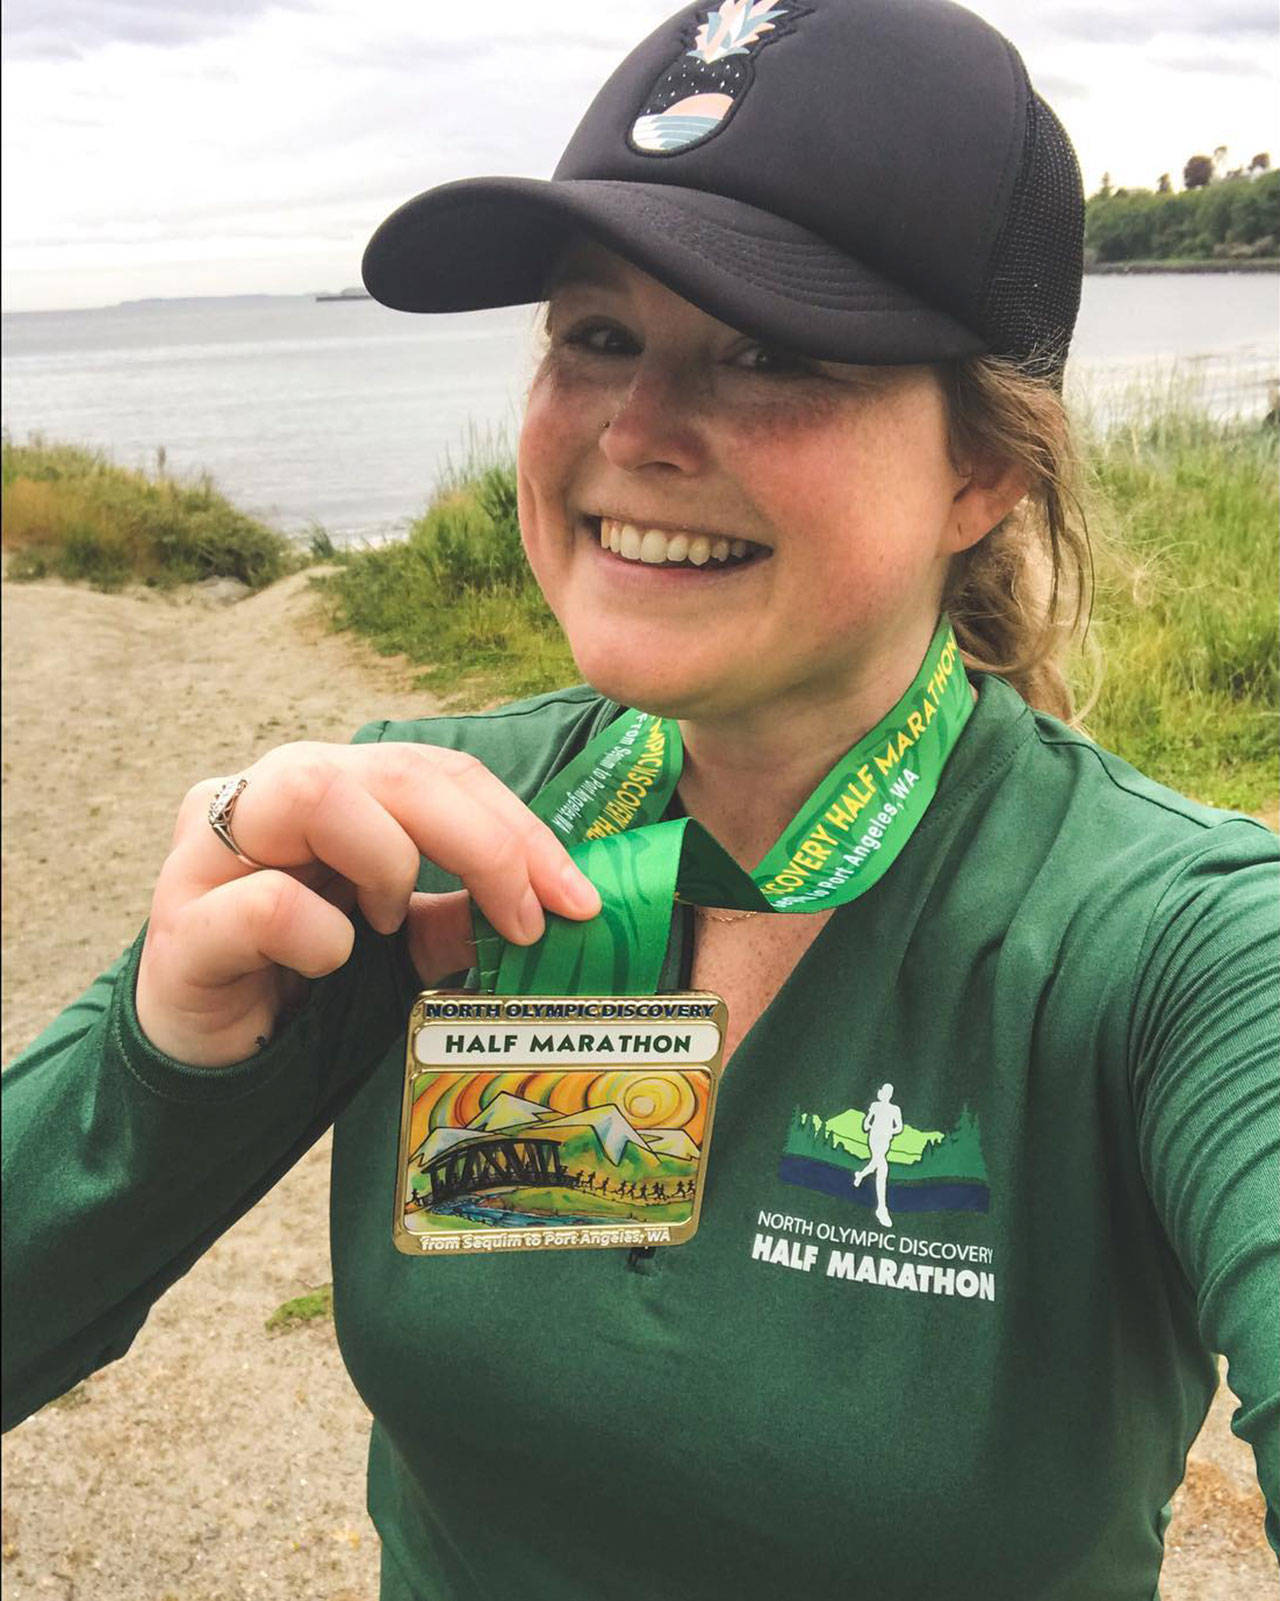 Emma Swan, Executive Assistant of Human Resources at Olympic Medical Center, completes her OMCares half marathon. Submitted photo